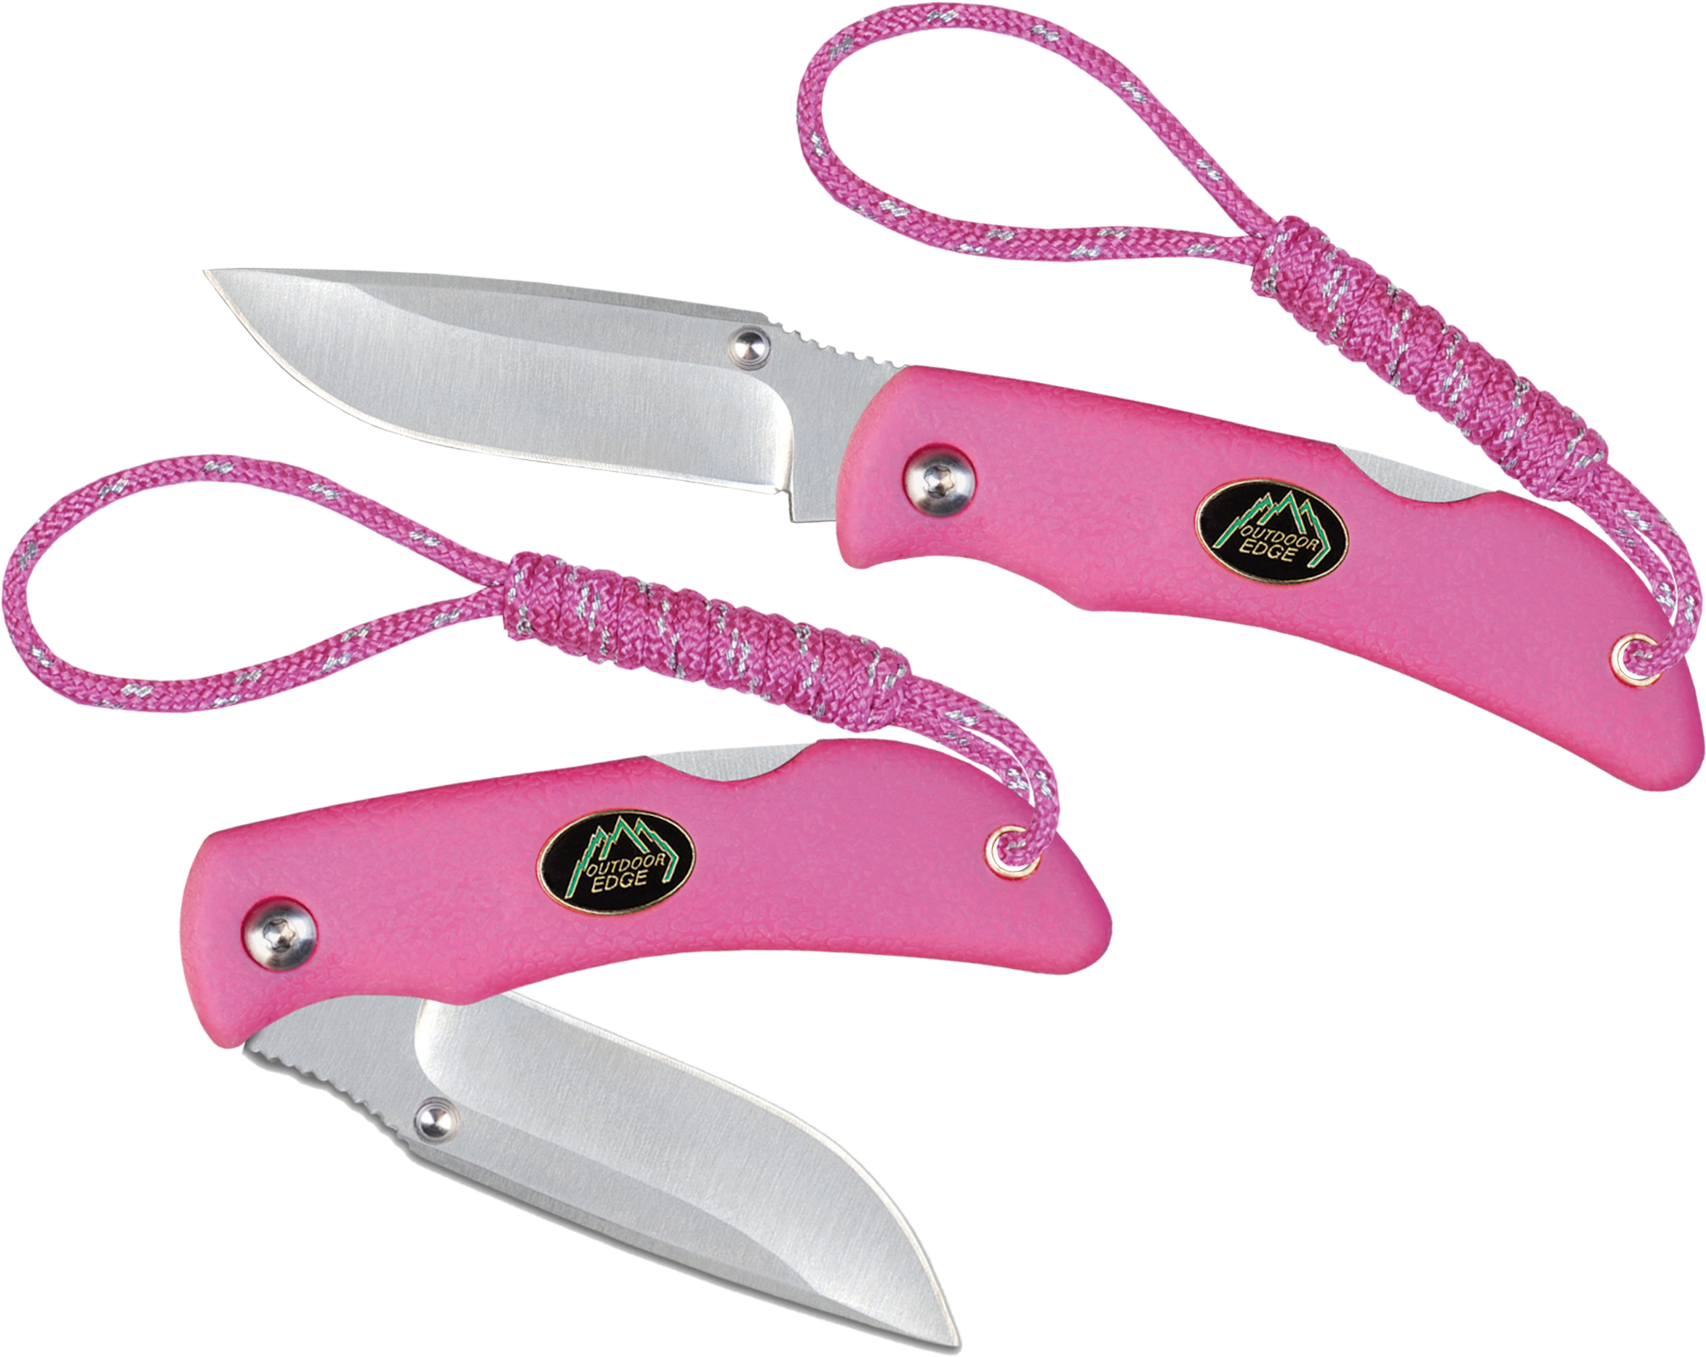 Outdoor Edge Mini-Babe Pink -  - Mansfield Hunting & Fishing - Products to prepare for Corona Virus